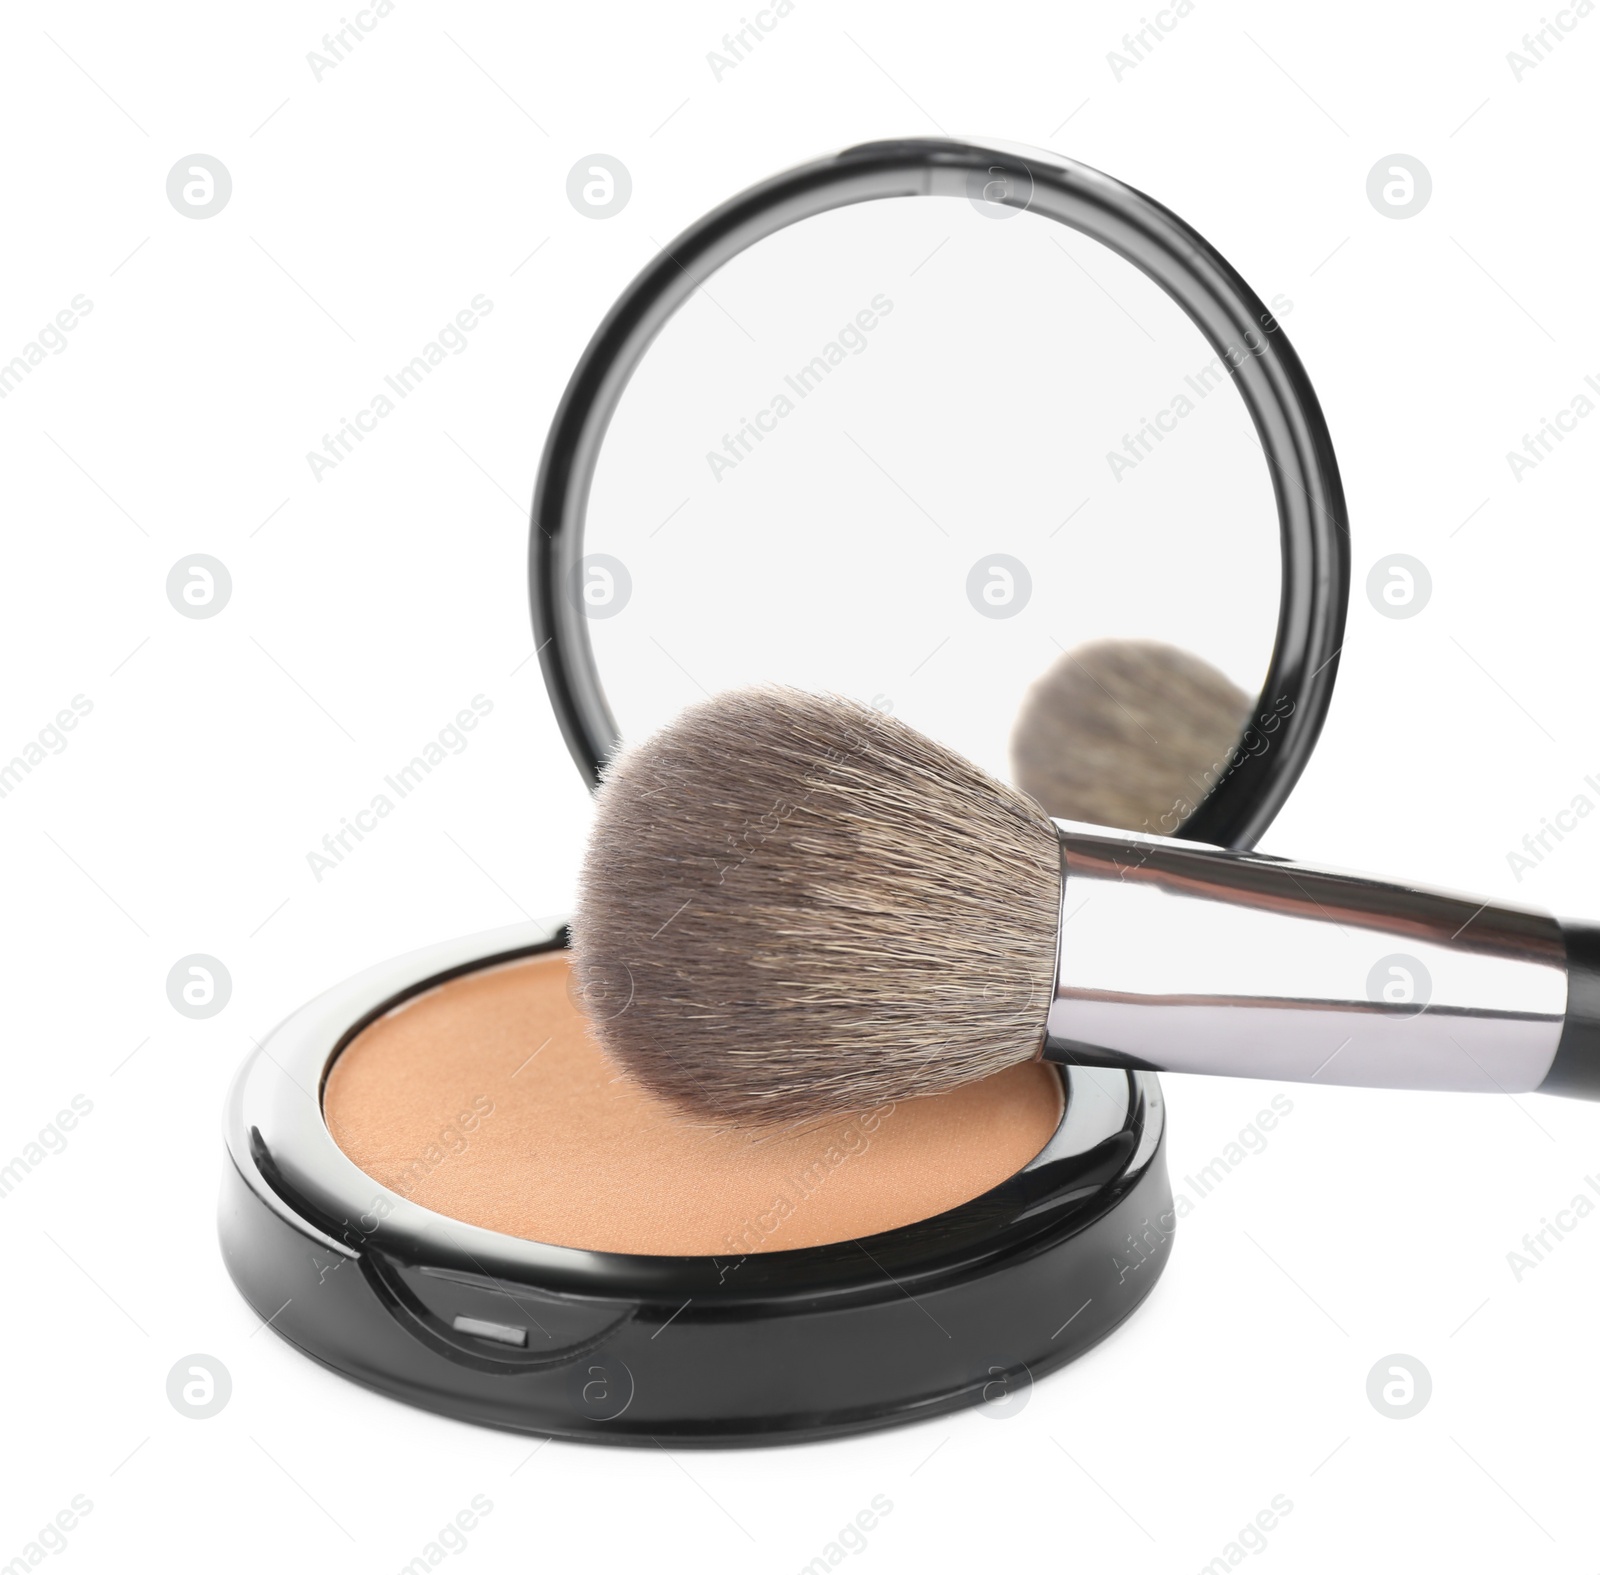 Photo of Face powder with brush on white background. Makeup product